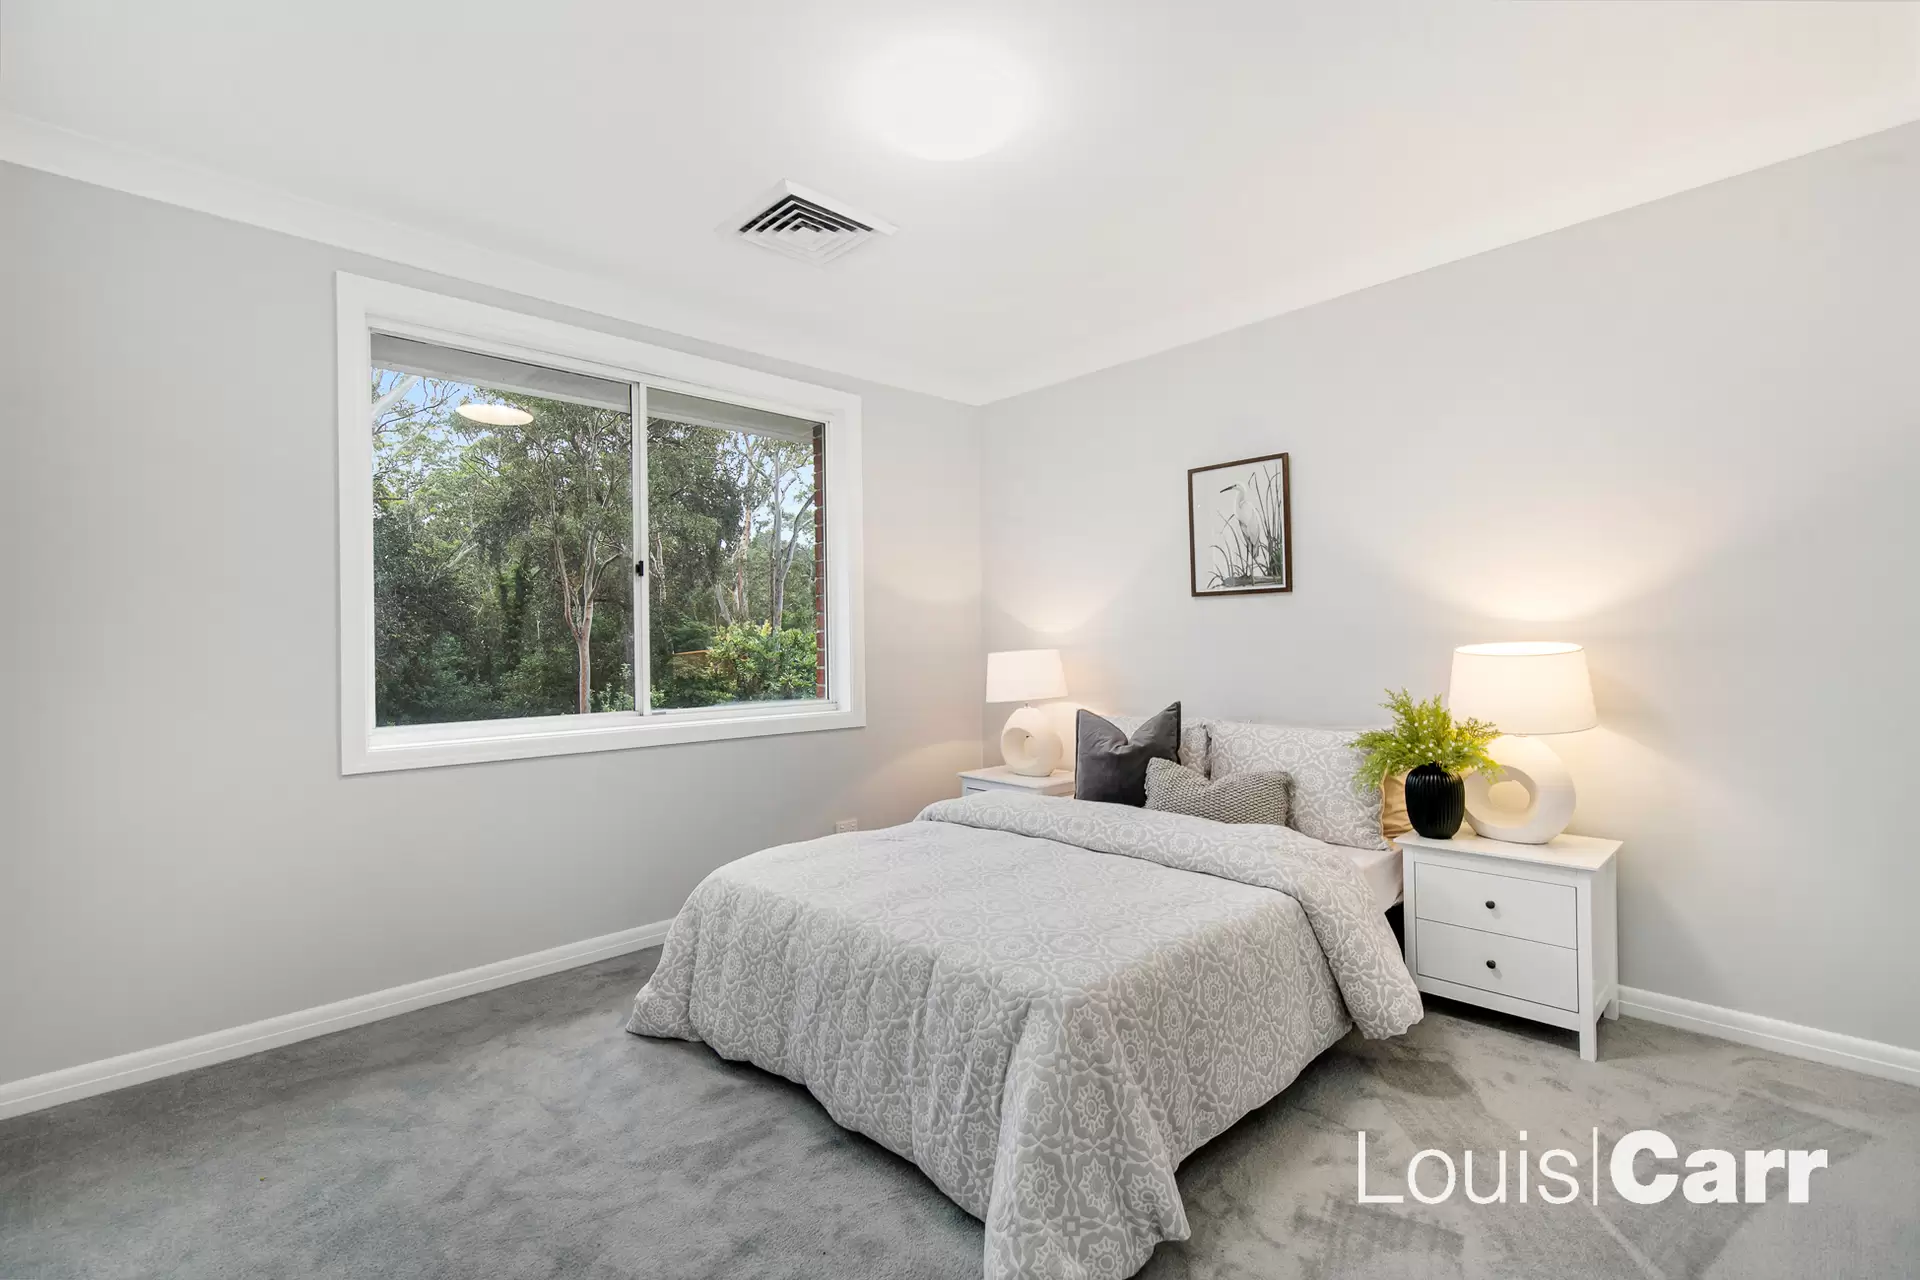 Photo #9: 22 Willowleaf Place, West Pennant Hills - For Sale by Louis Carr Real Estate